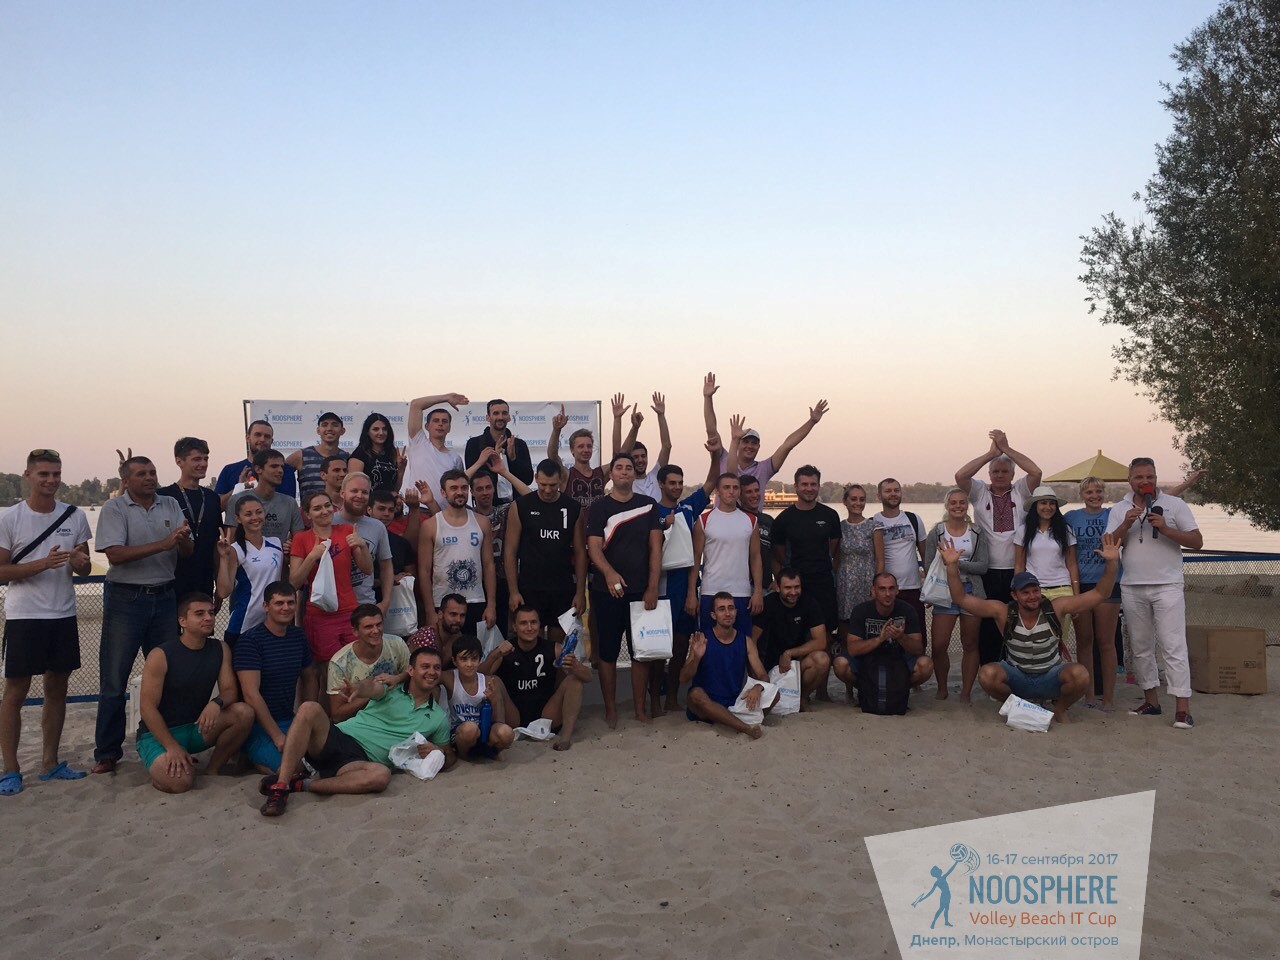 Participants of Noosphere Volley Beach IT Cup 2017